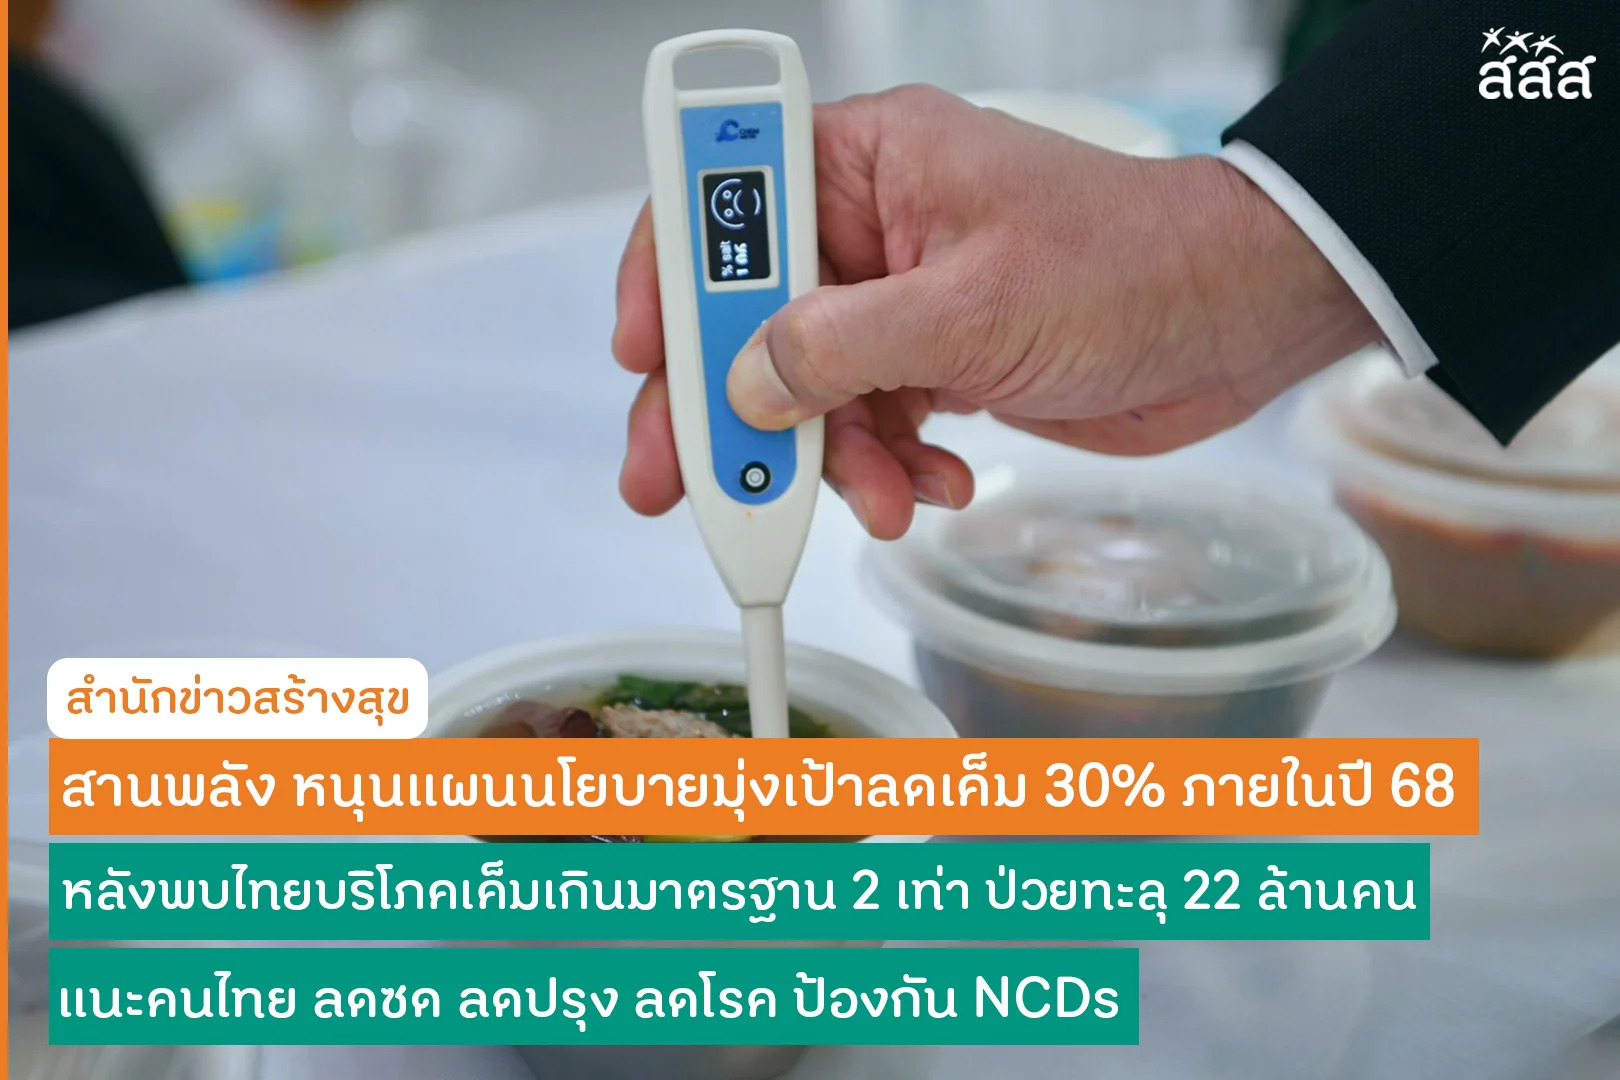 ThaiHealth backs plan to cut down salt consumption by 30% by 2025 following shocking discovery of 22 million salty-tooth NCD patients thaihealth